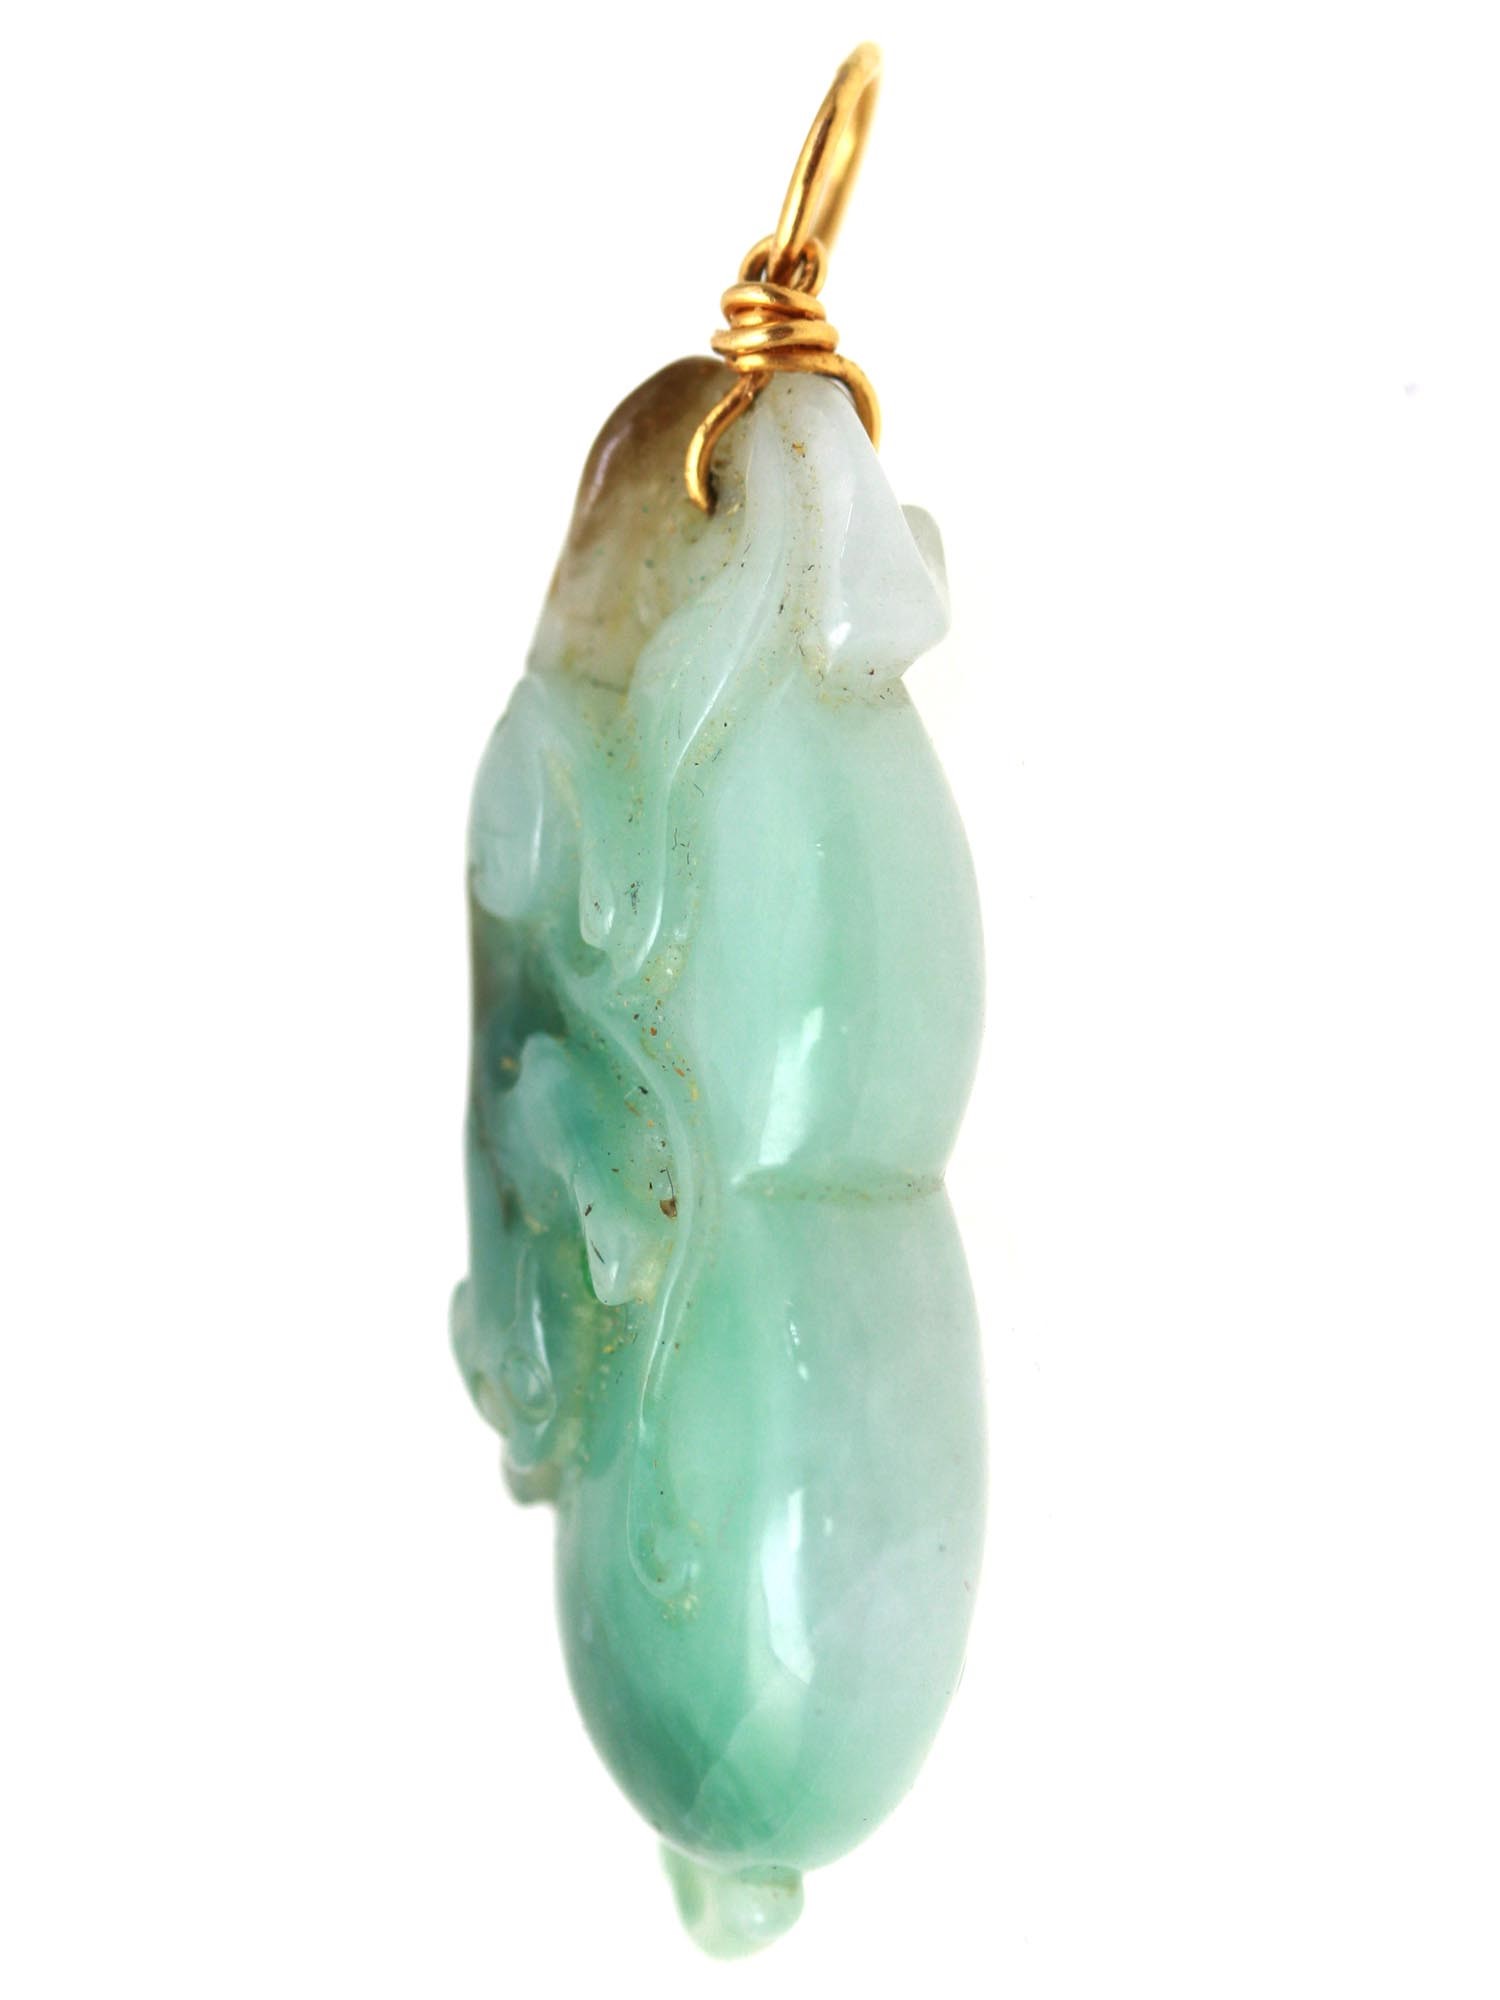 A CHINESE GREEN JADE PENDANT WITH 14K GOLD LOOP PIC-1